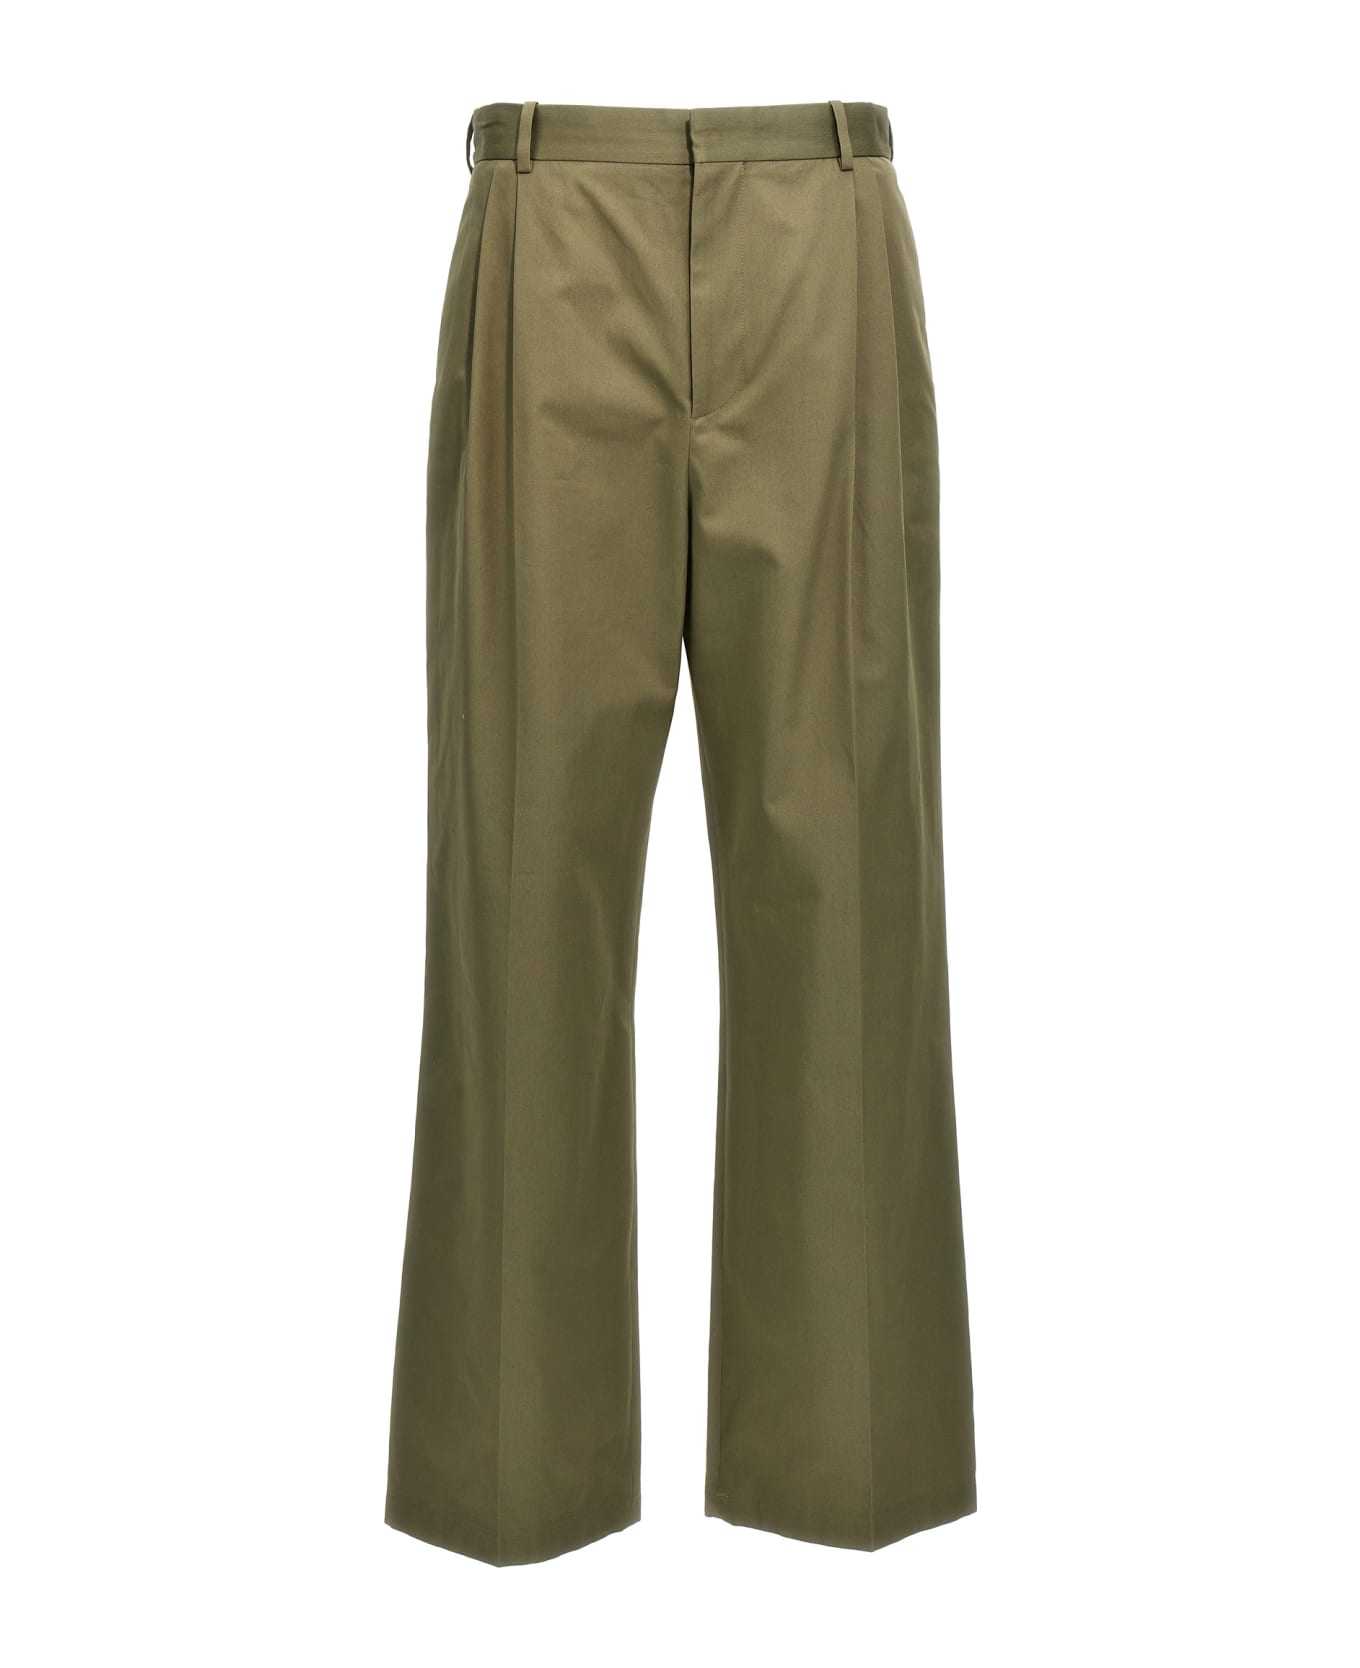 Loewe Central Pleated Trousers - Green ボトムス